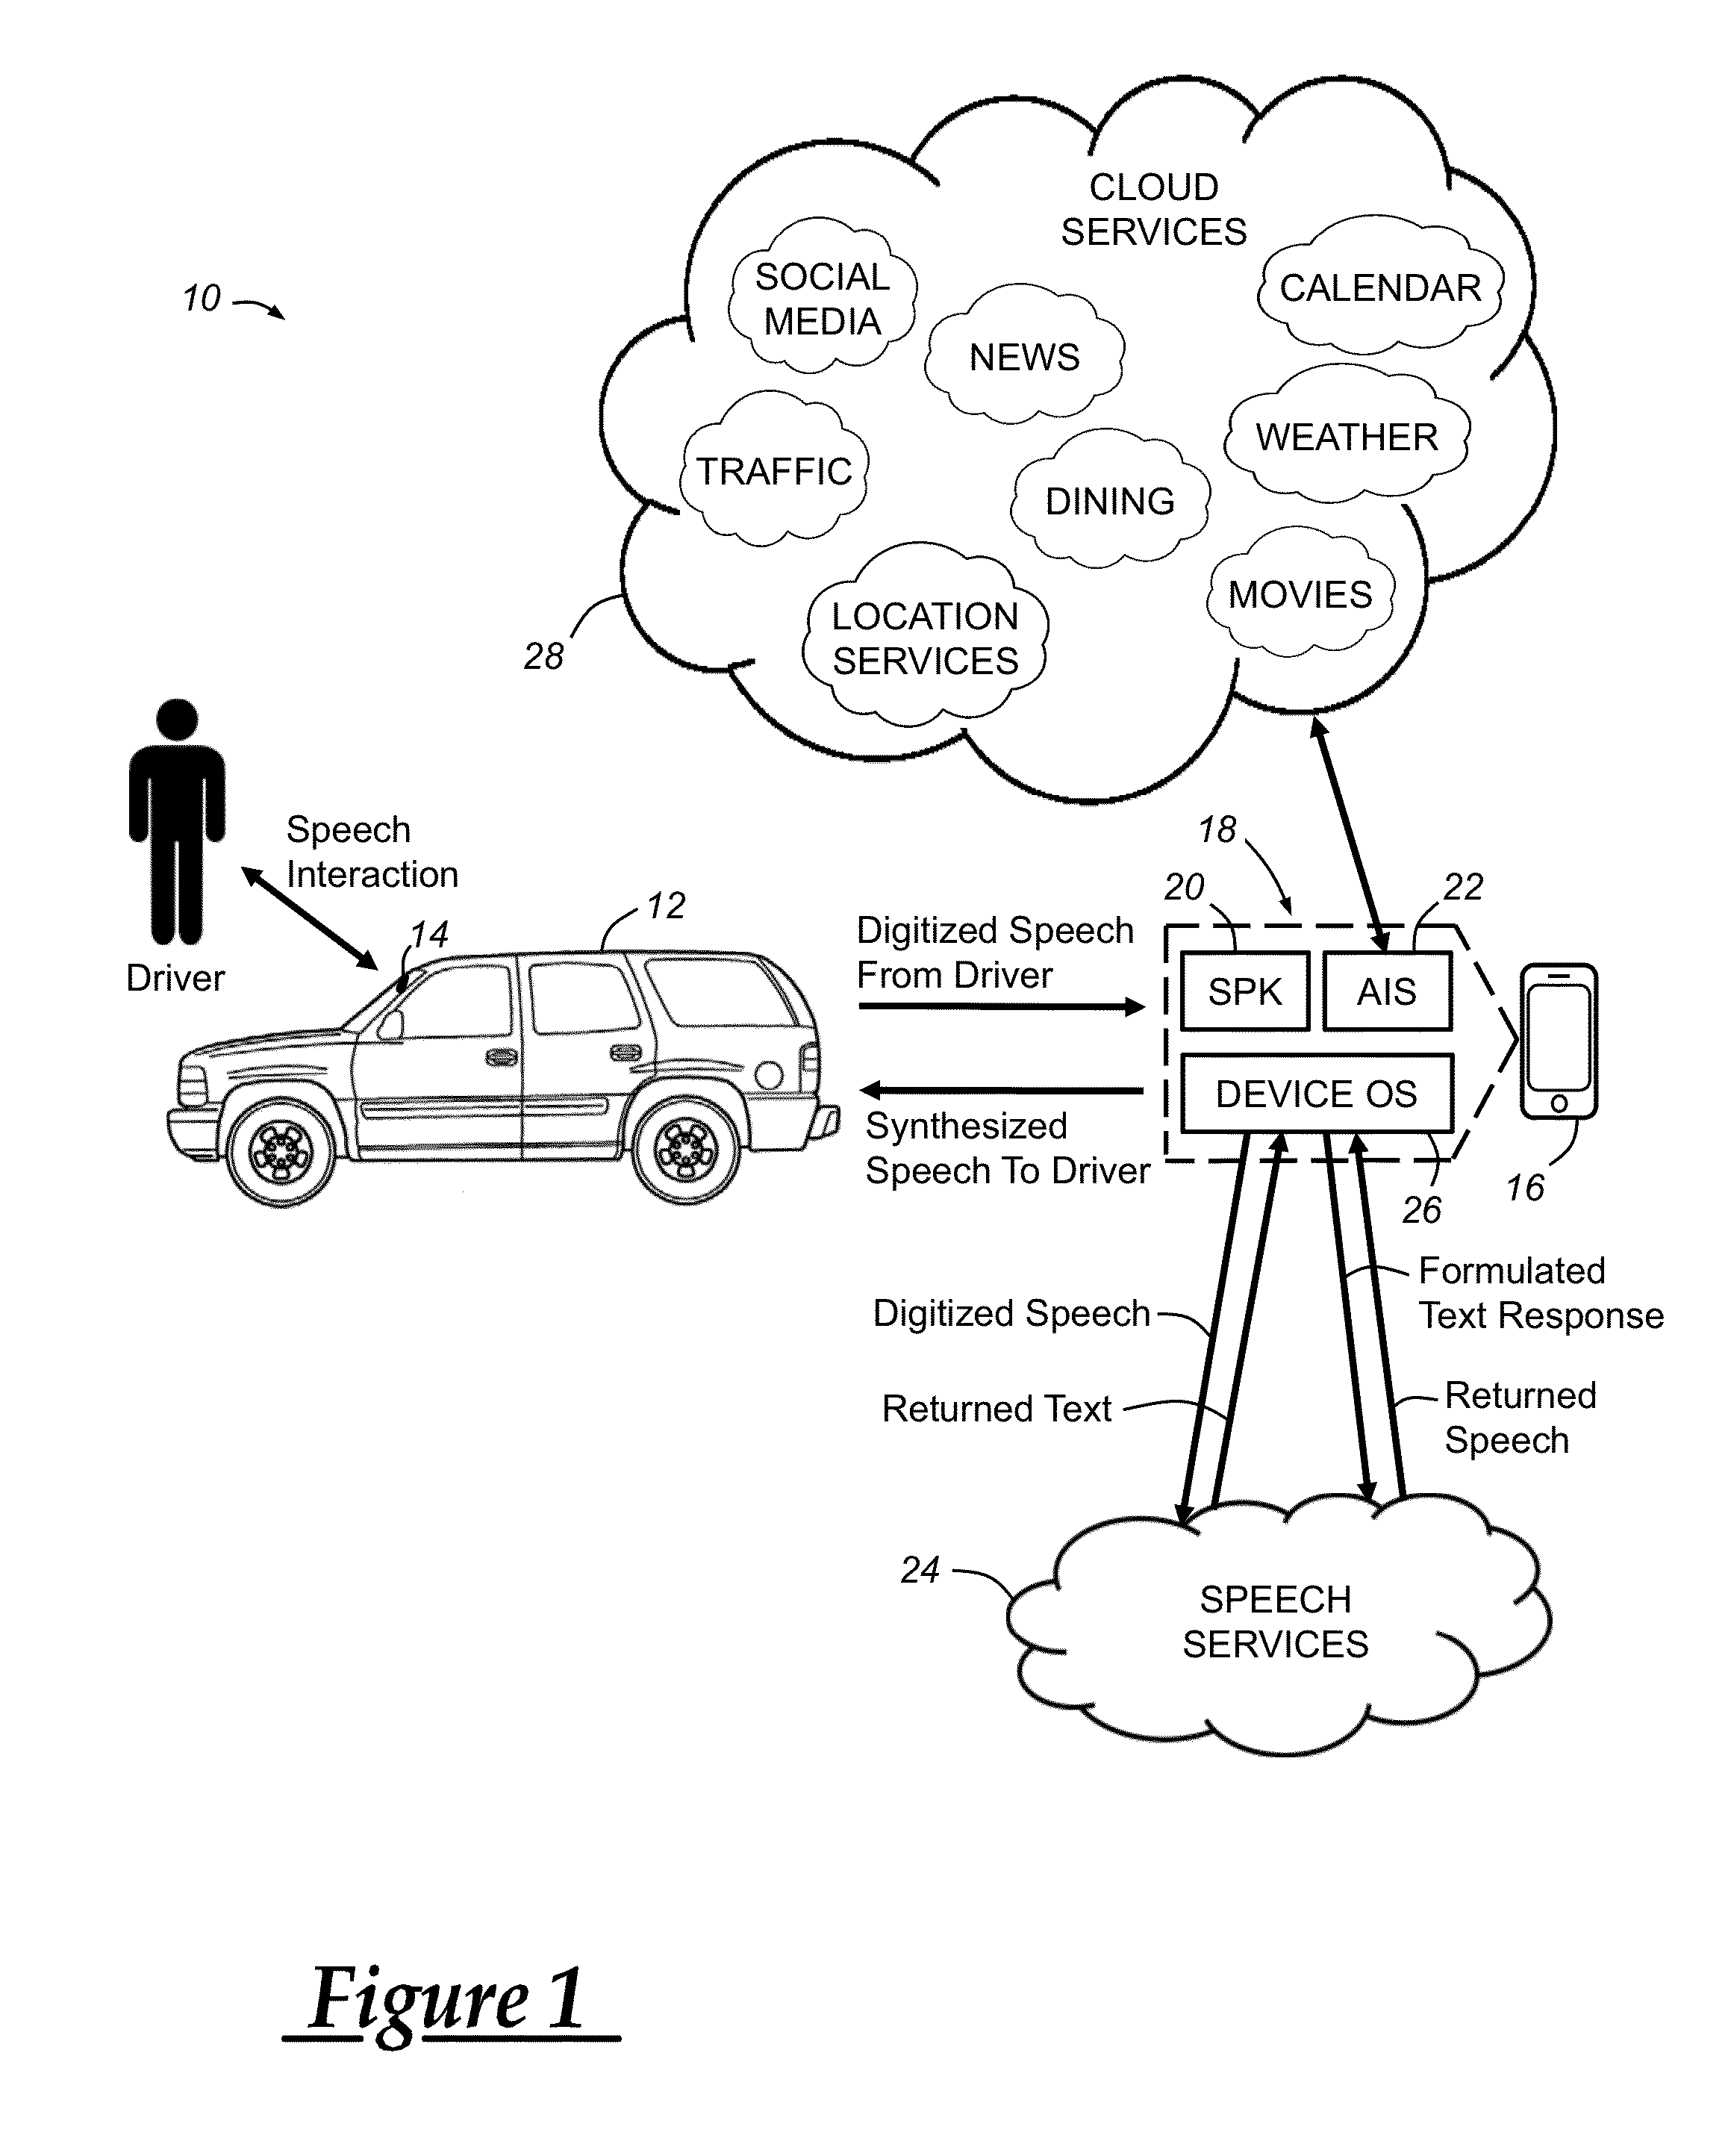 Speech-based user interface for a mobile device